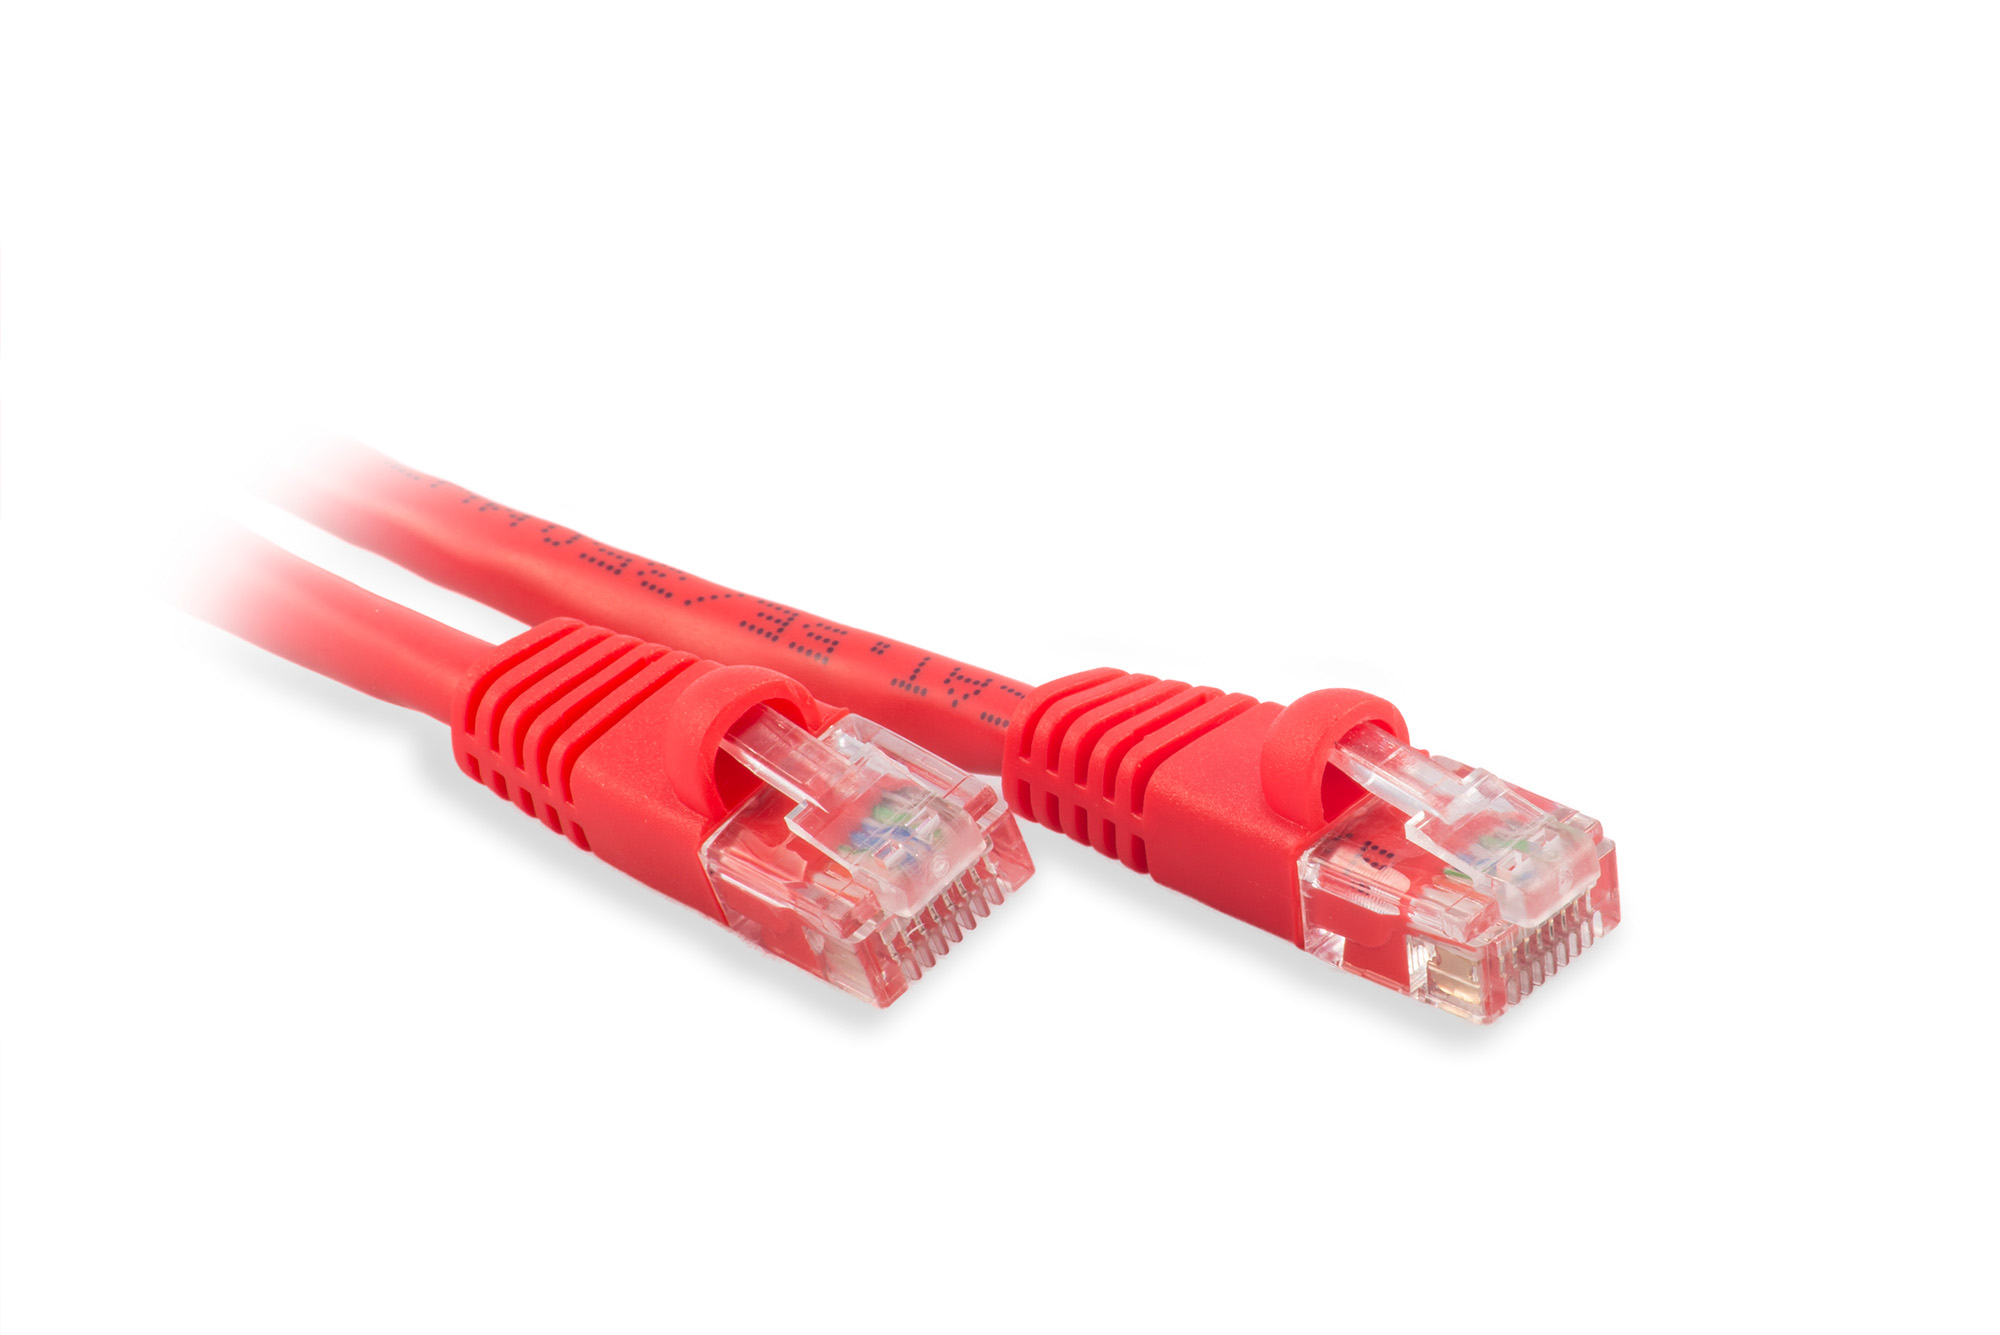 10ft Cat5e Ethernet Patch Cable - Red Color - Snagless Boot, Stranded, RJ45, 350Mhz, 24AWG